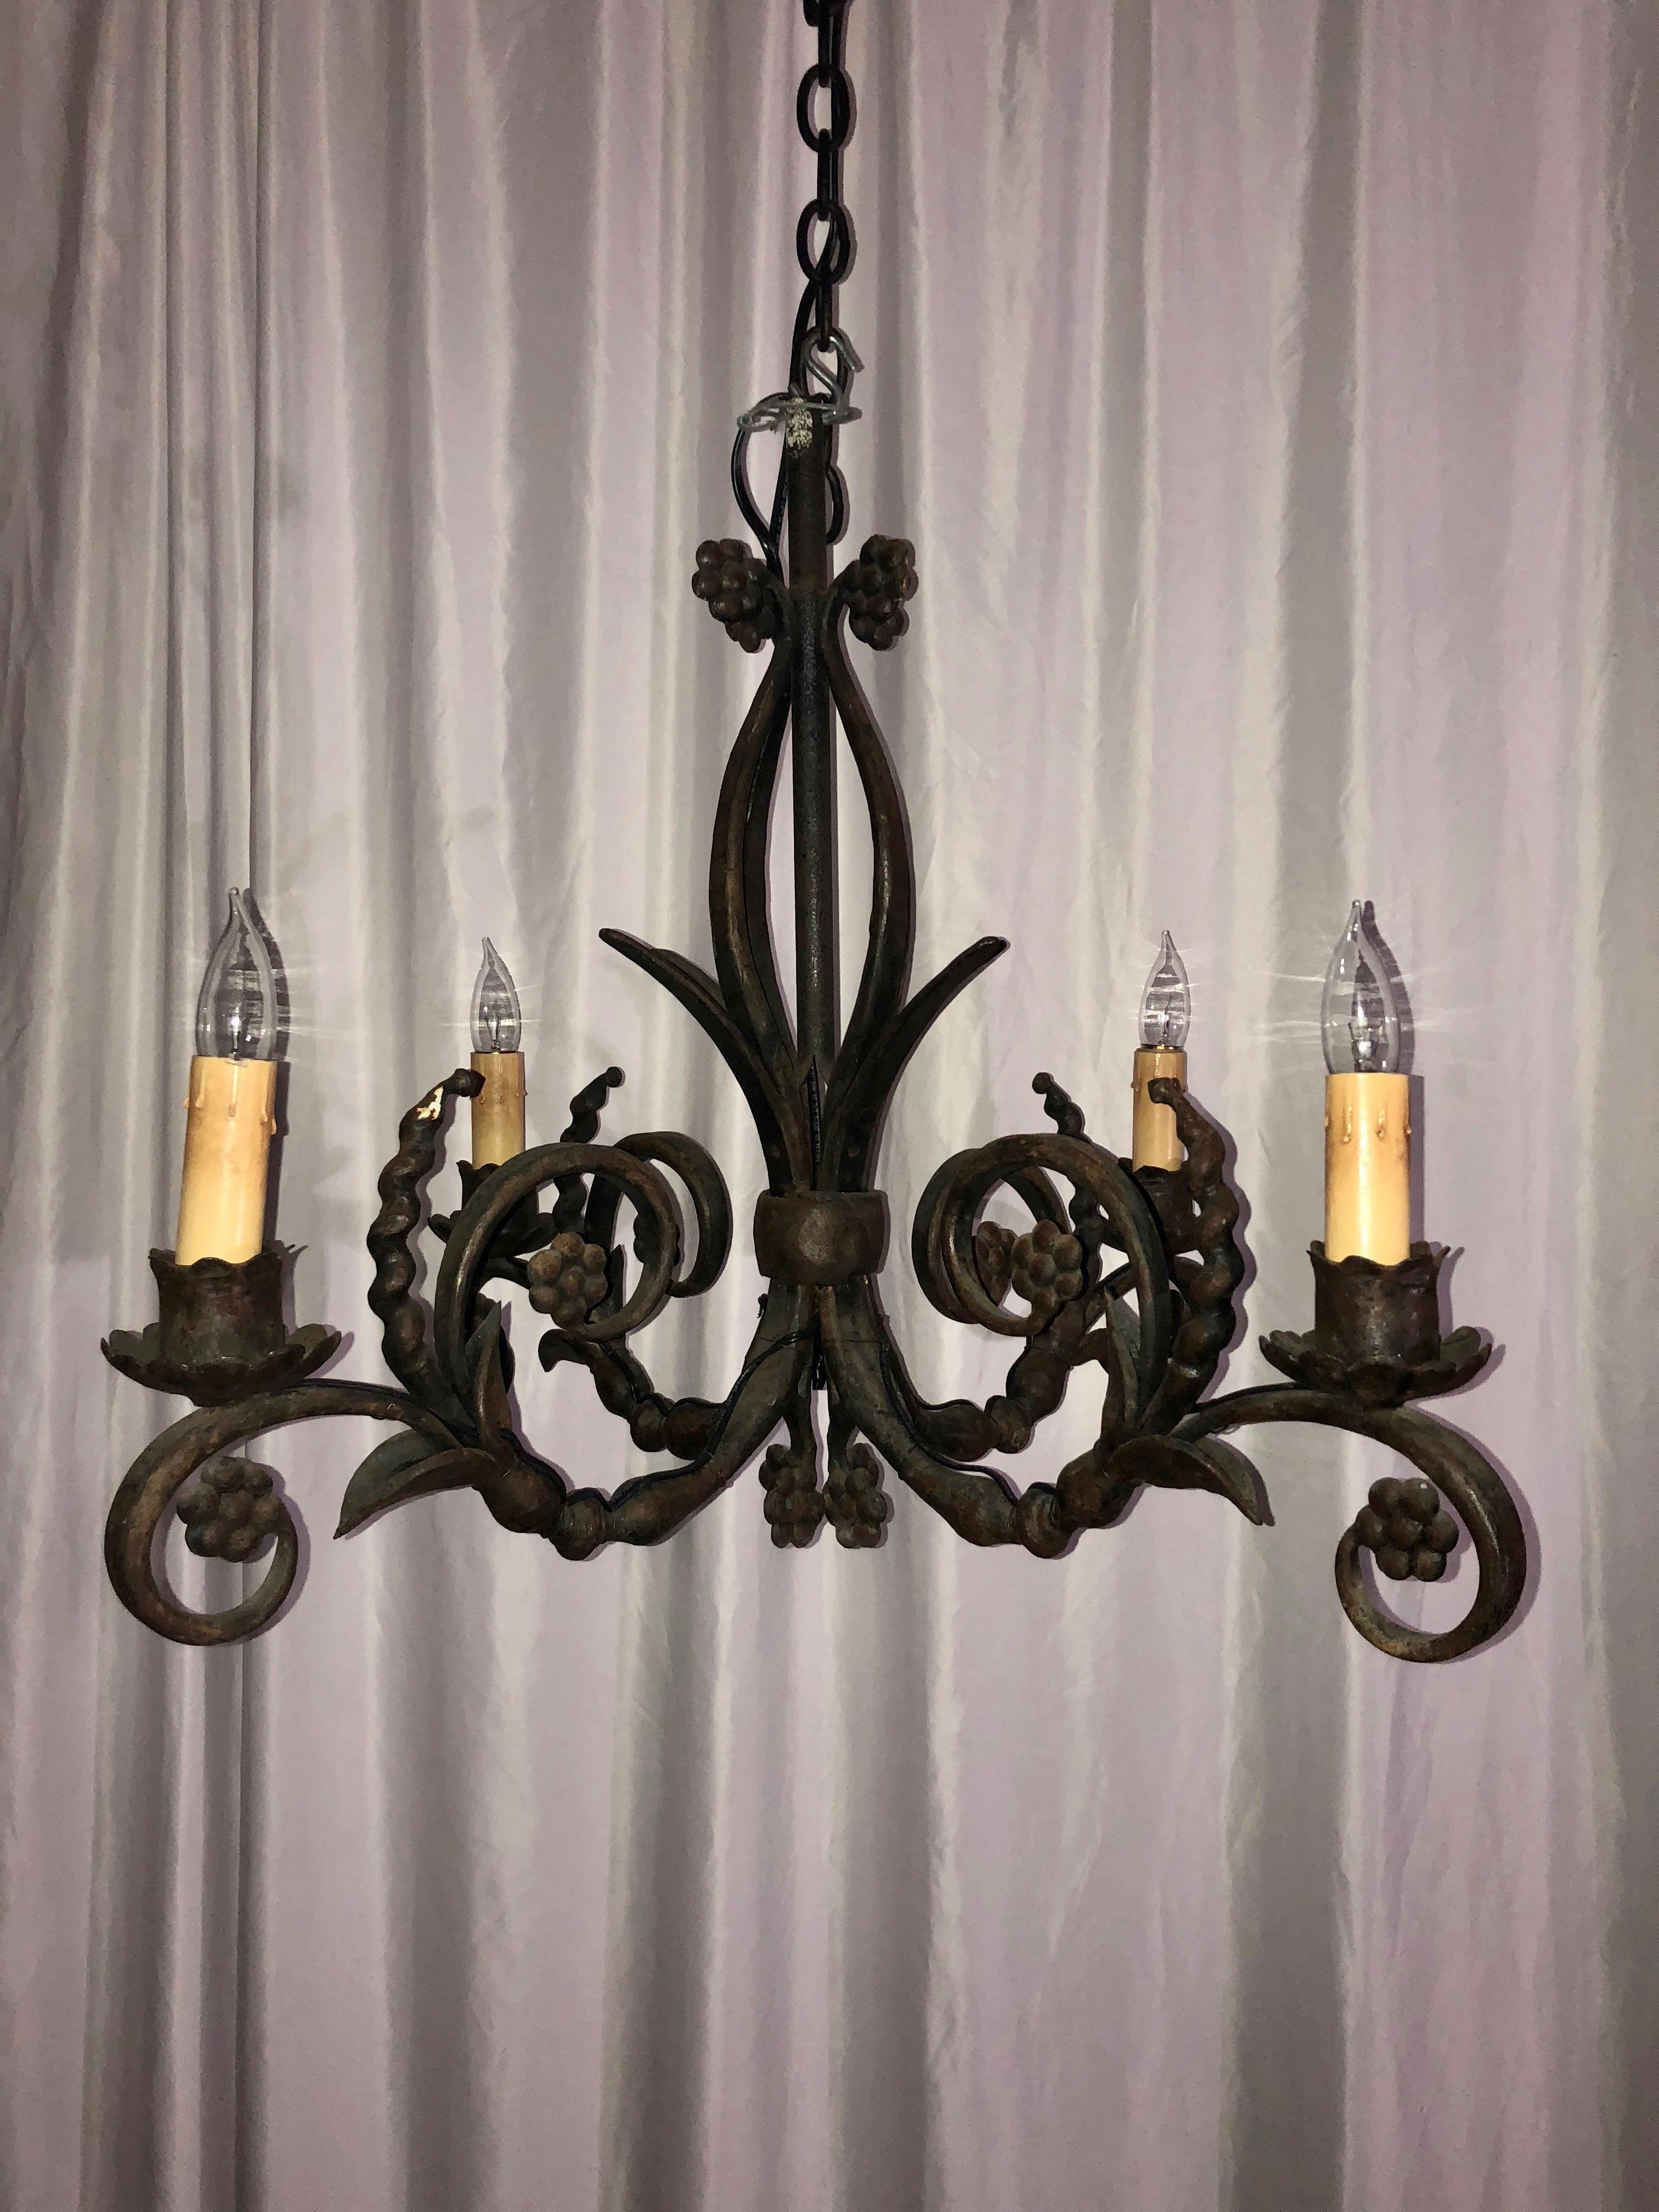 We have two of these chandeliers in our shop. They are marked for individual sale.